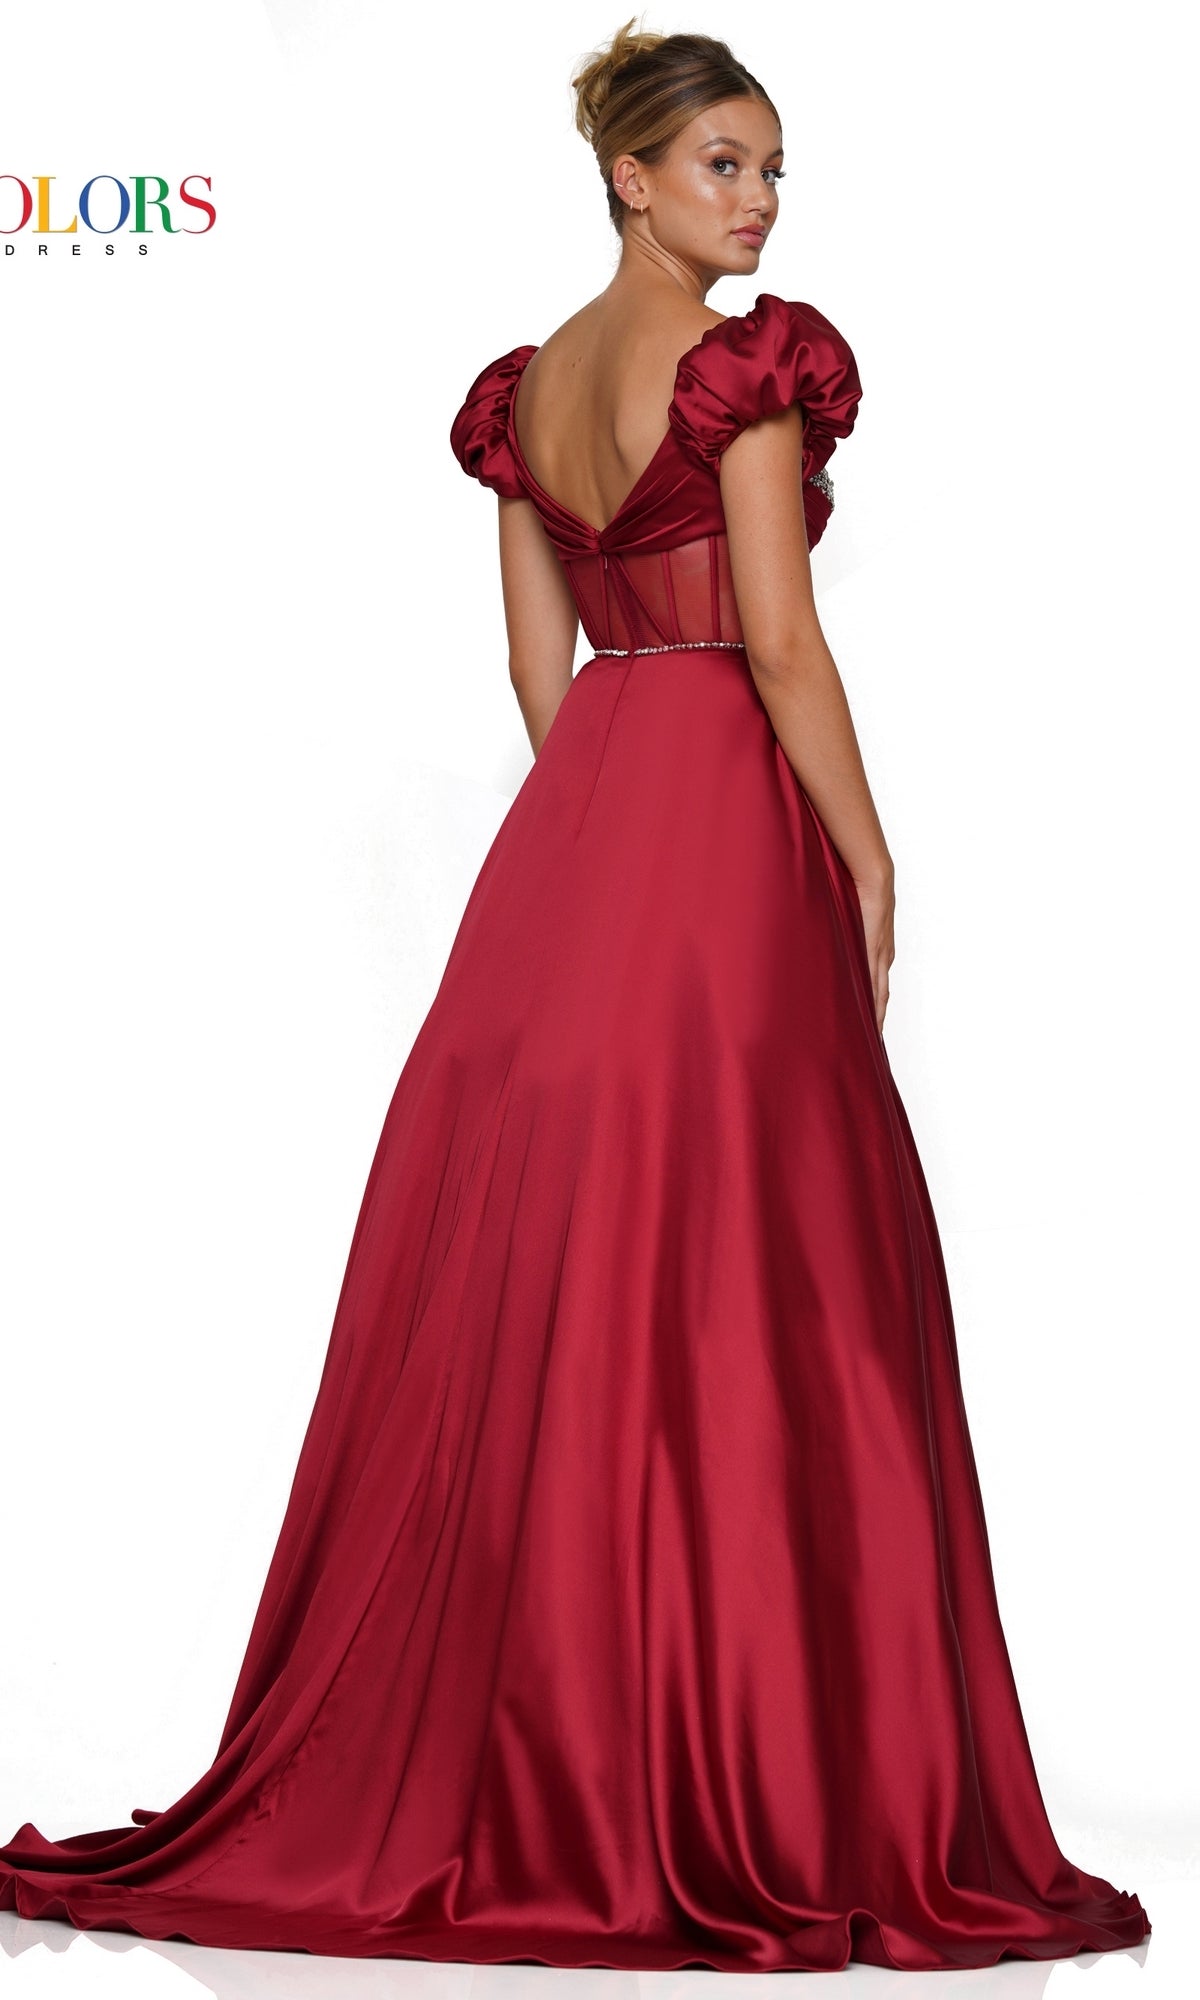 Colors Dress Puff-Sleeve Formal Ball Gown 3249